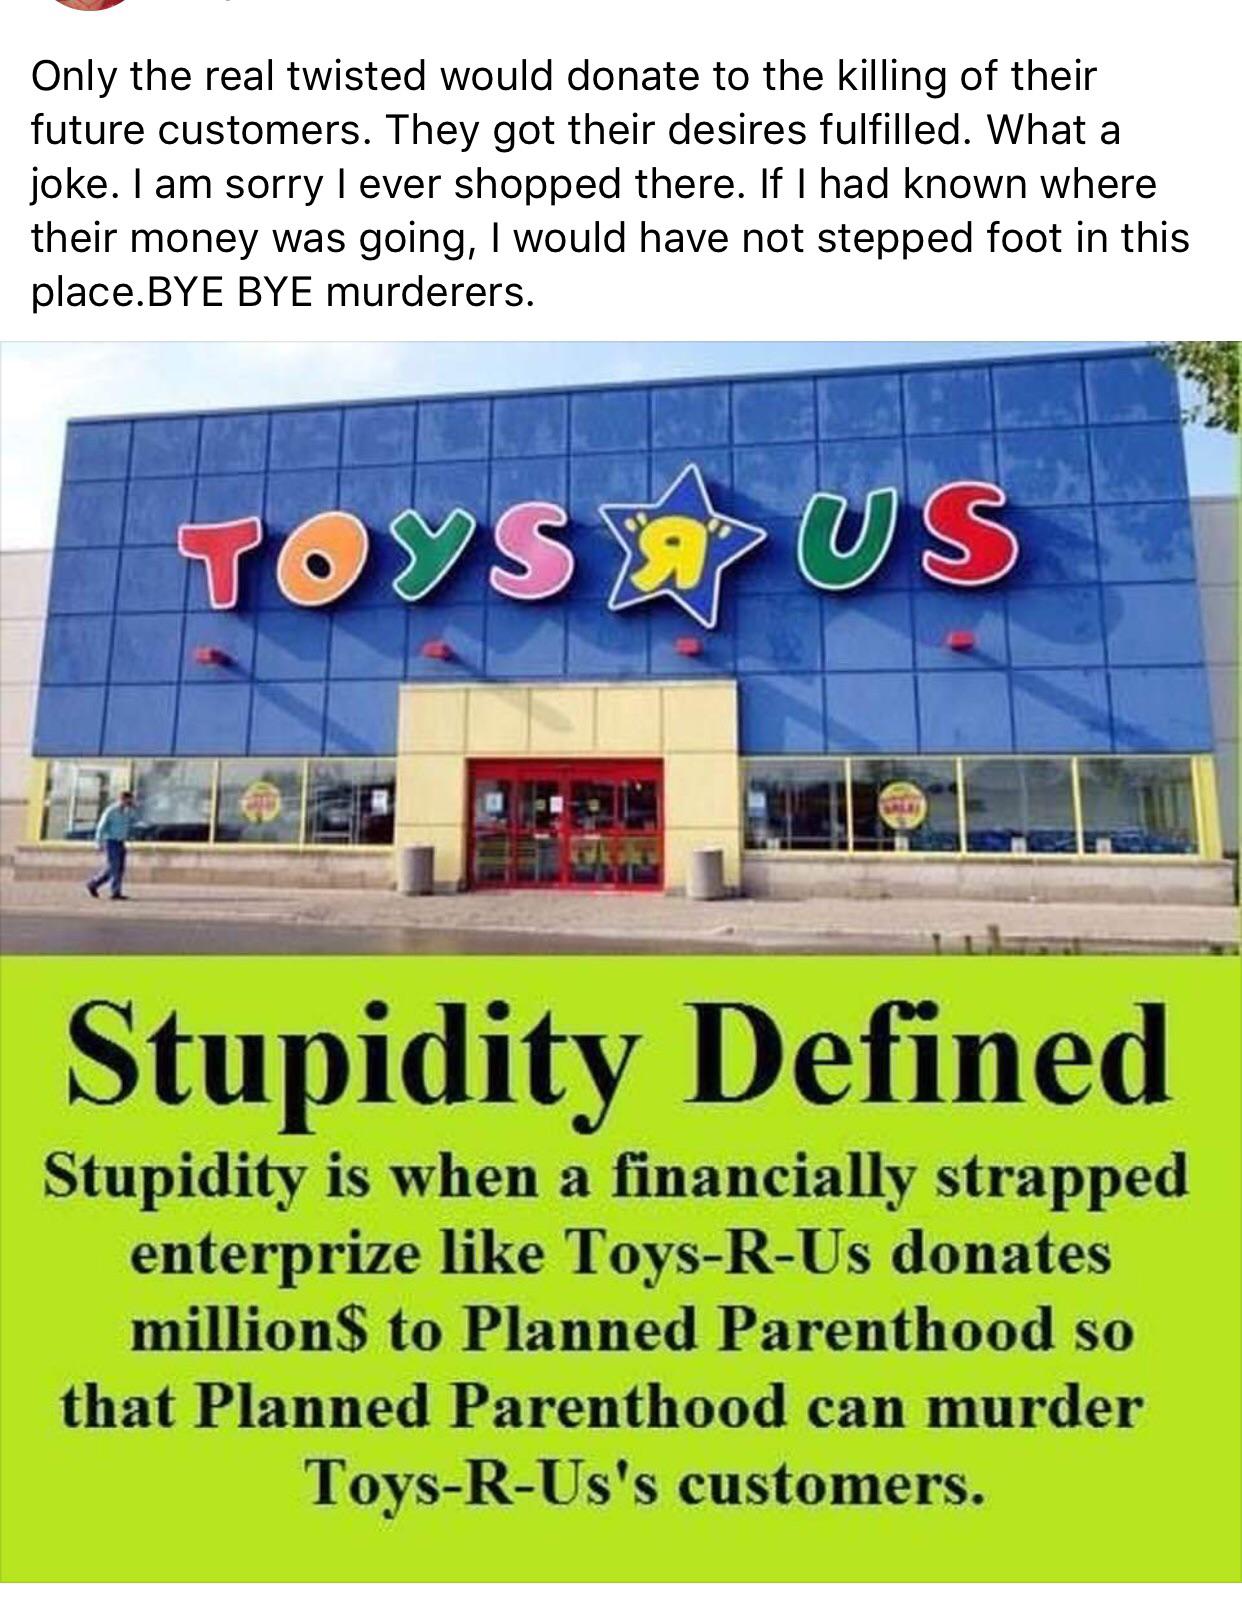 Only the real twisted would donate to the killing of their future customers. They got their desires fulfilled. What a joke. I am sorry I ever shopped there. If I had known where their money was going, I would have not stepped foot in this place.Bye Bye…